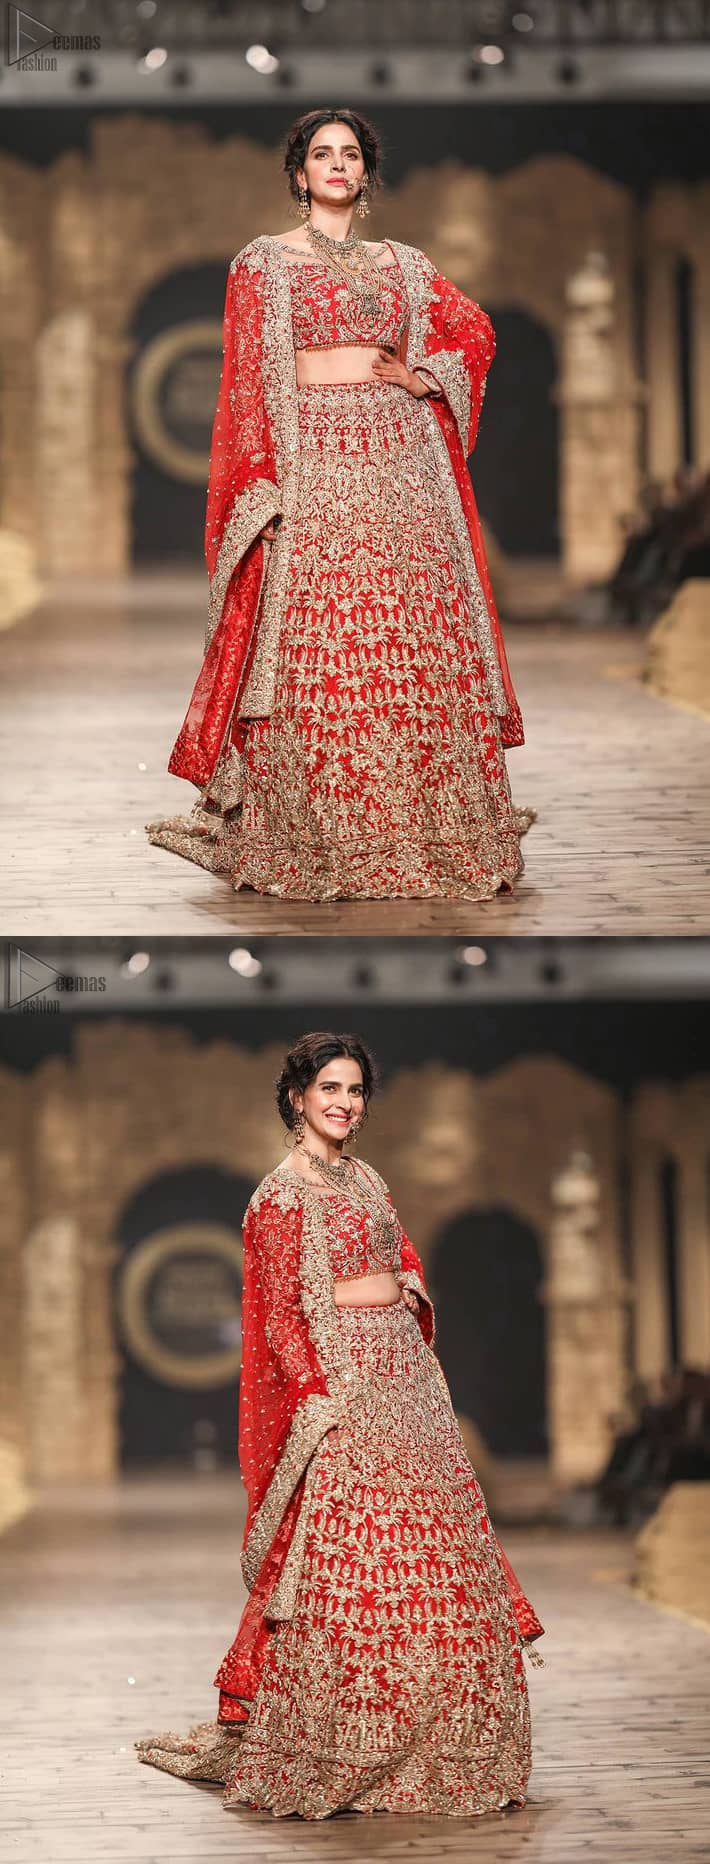 Pakistani Wedding Wear having Red Short Blouse Lehenga. While the final touch of golden embroidery concludes with the supreme elegance of the dress.